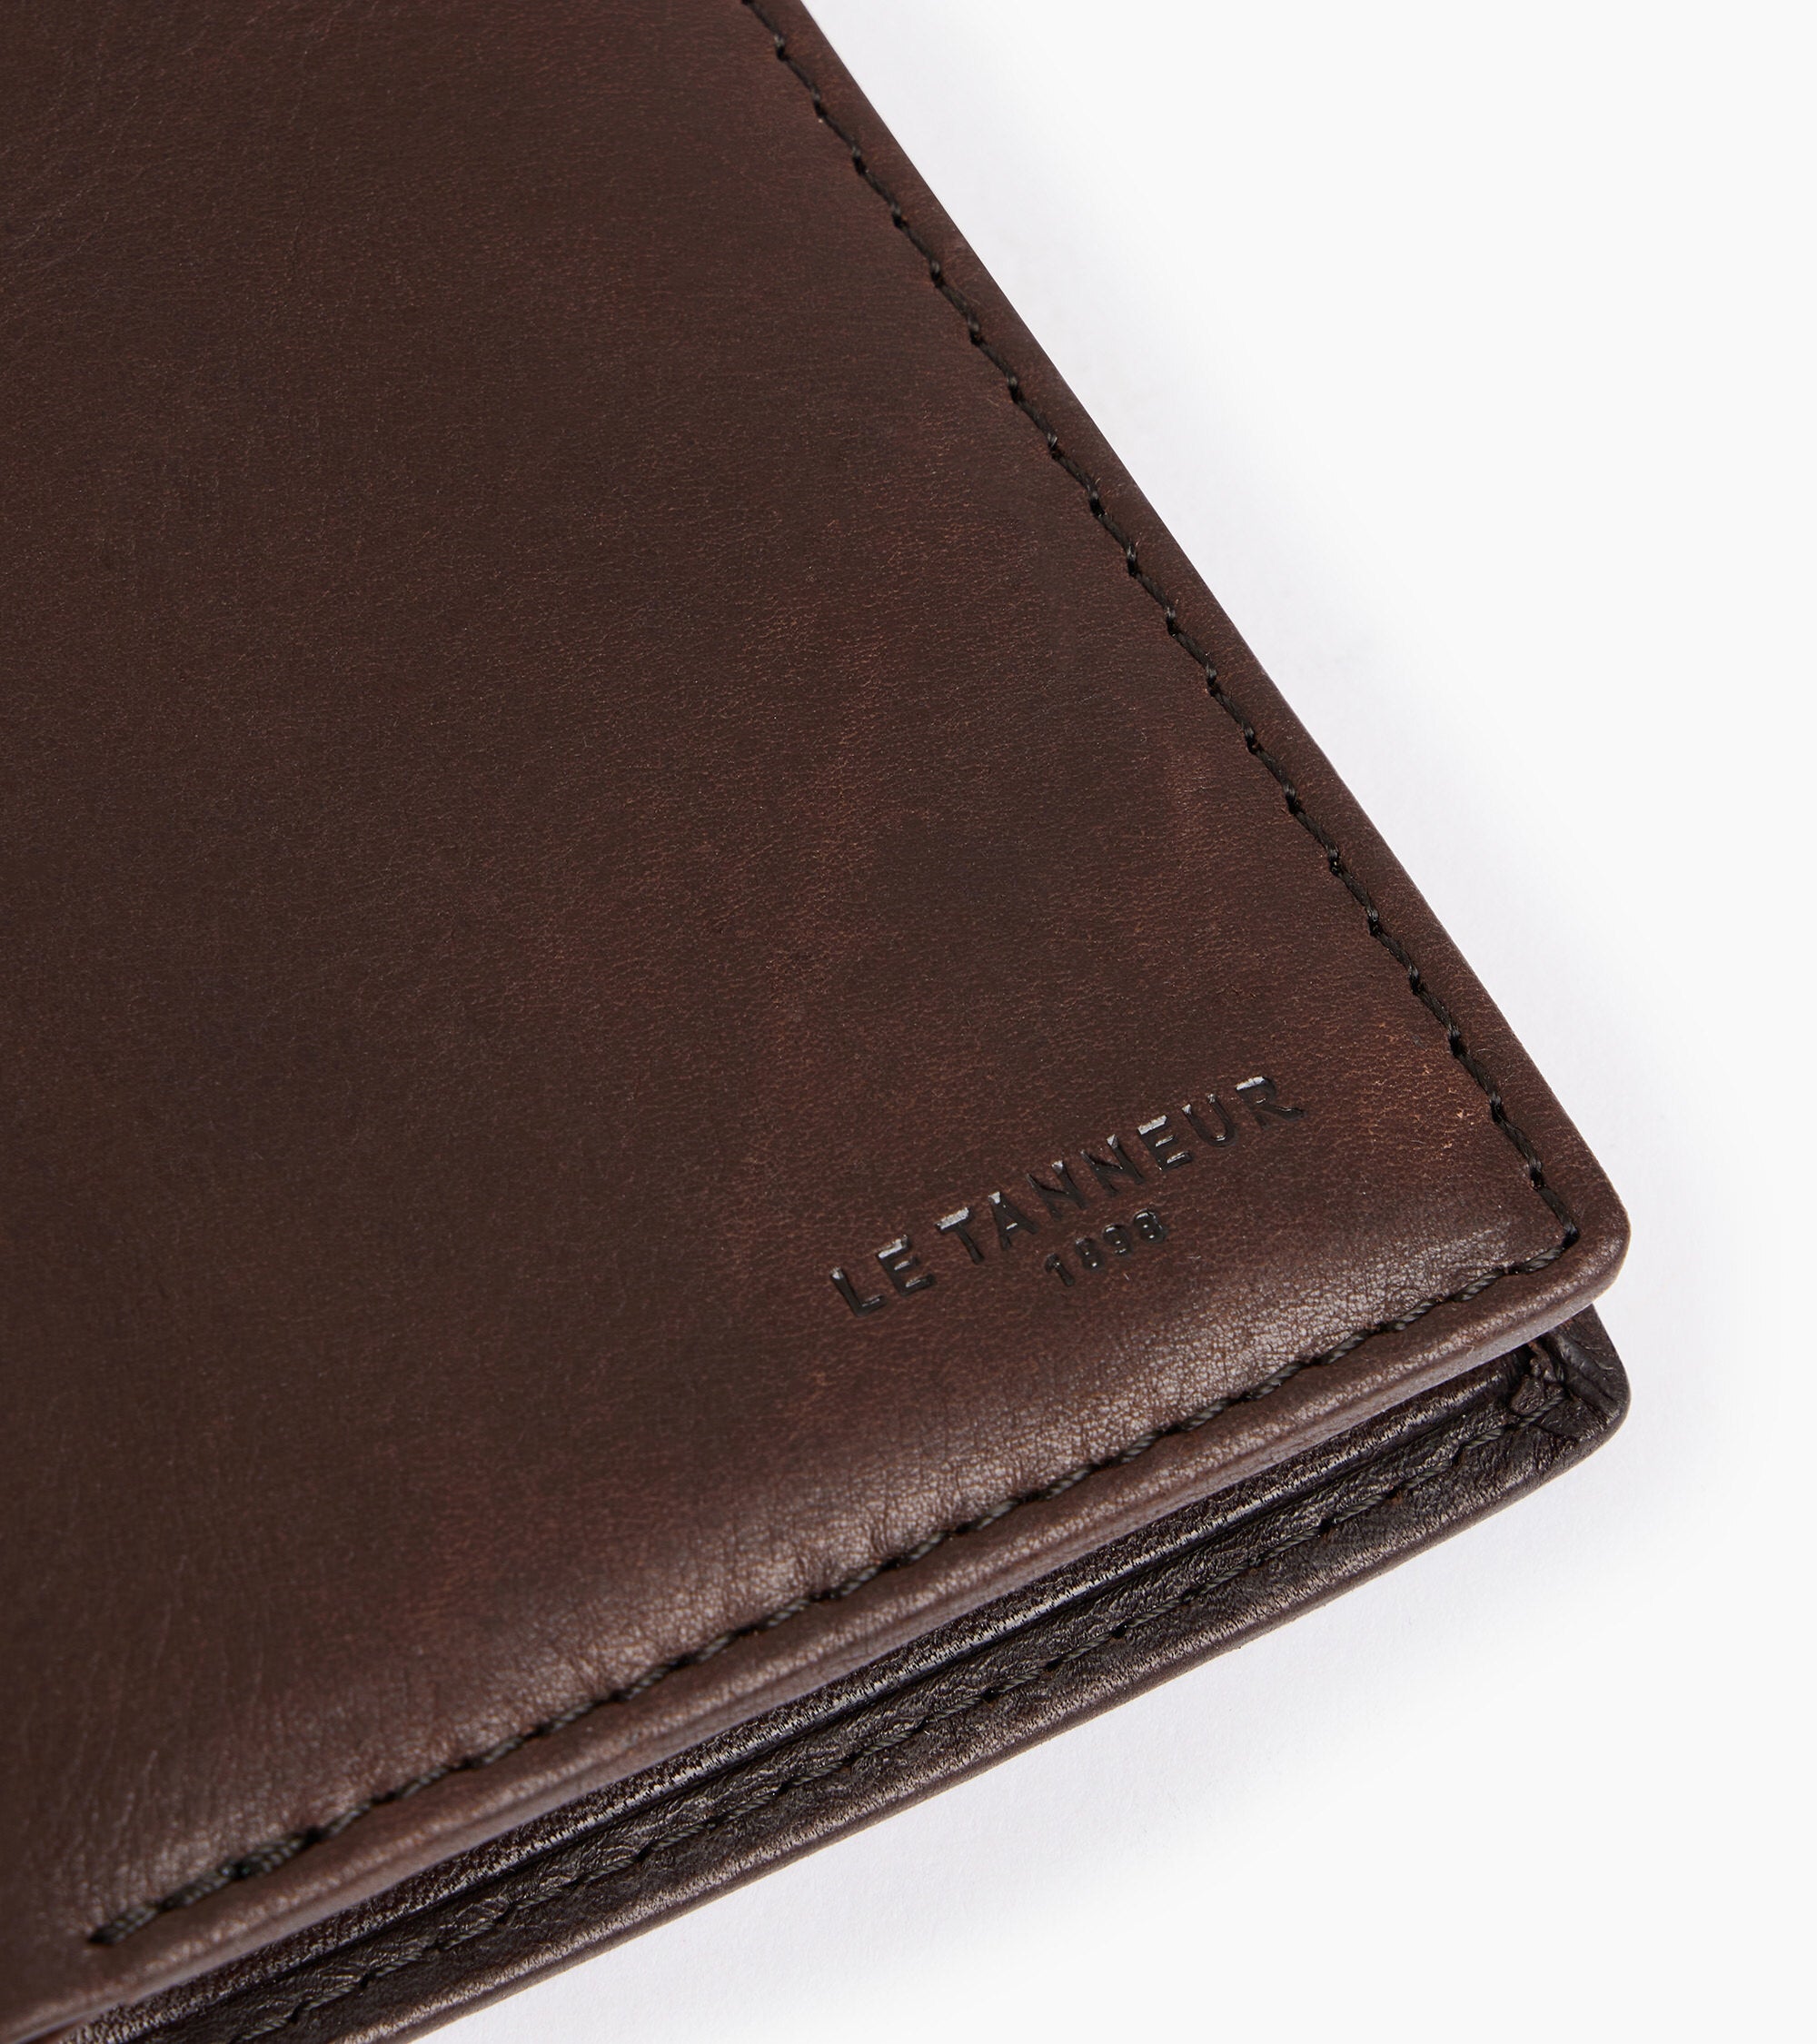 Gary oiled leather coin wallet with billfold